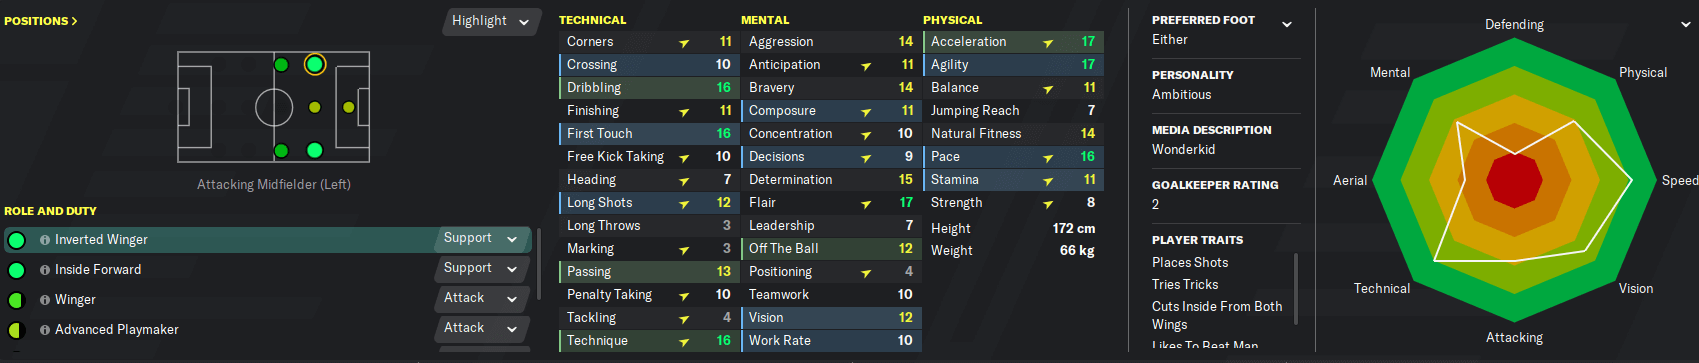 Football Manager player attributes